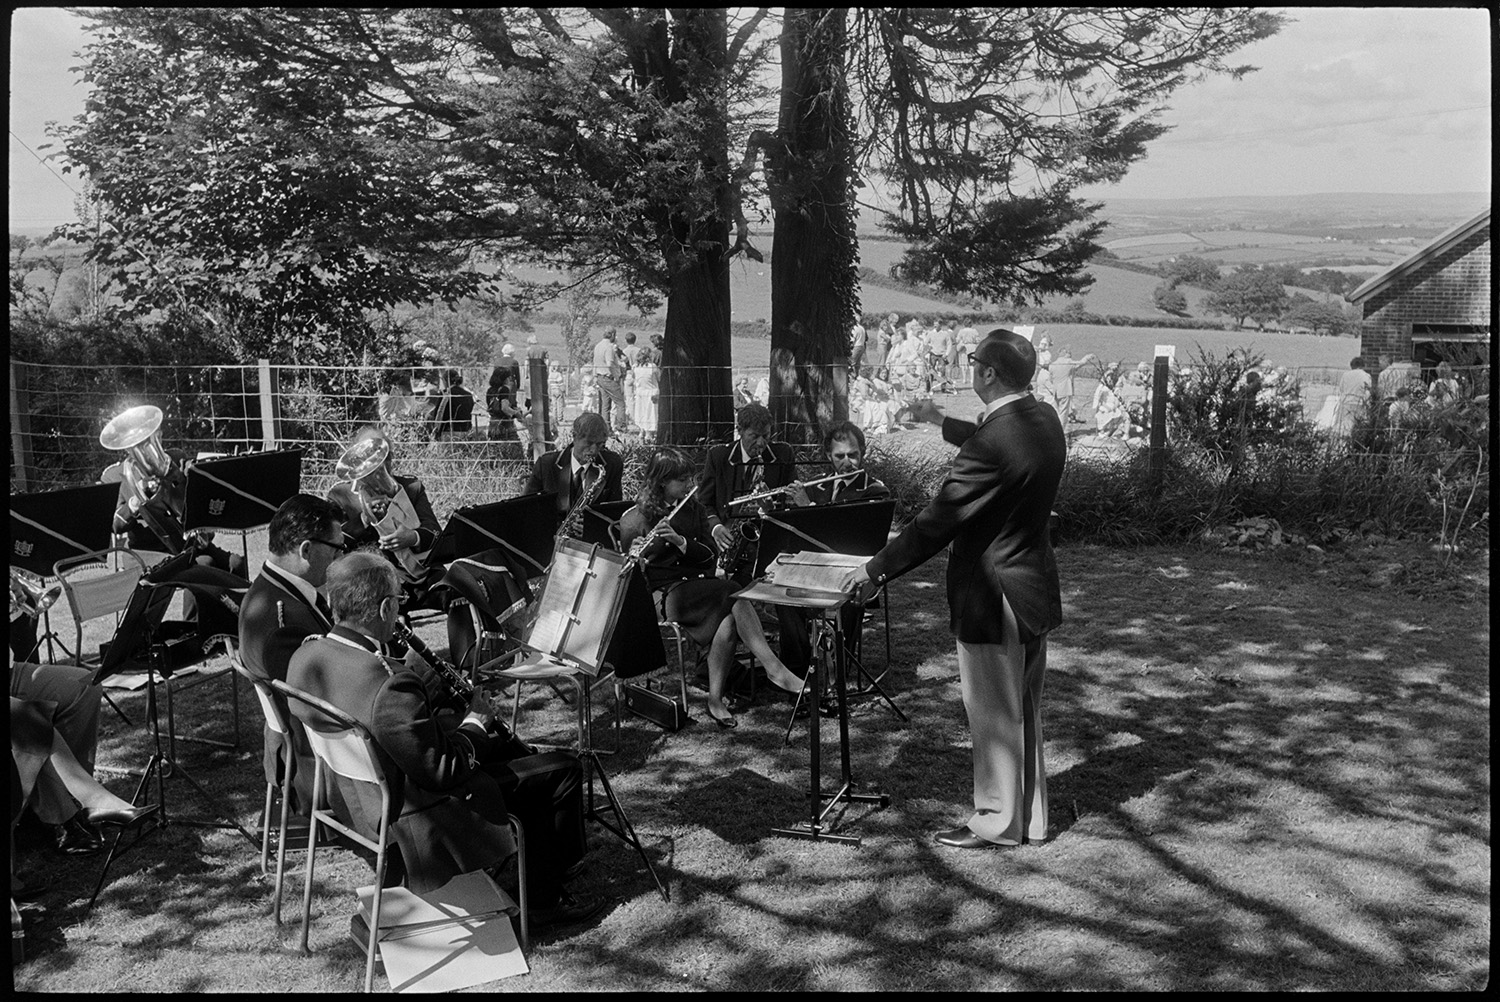 Fete, spectators, Brass Band, sideshows, games, pony rides. 
[A man conducting a band at Atherington church fete held at the vicarage. They are playing a field by a tree. People looking at stalls in the vicarage garden can be seen in the background.]